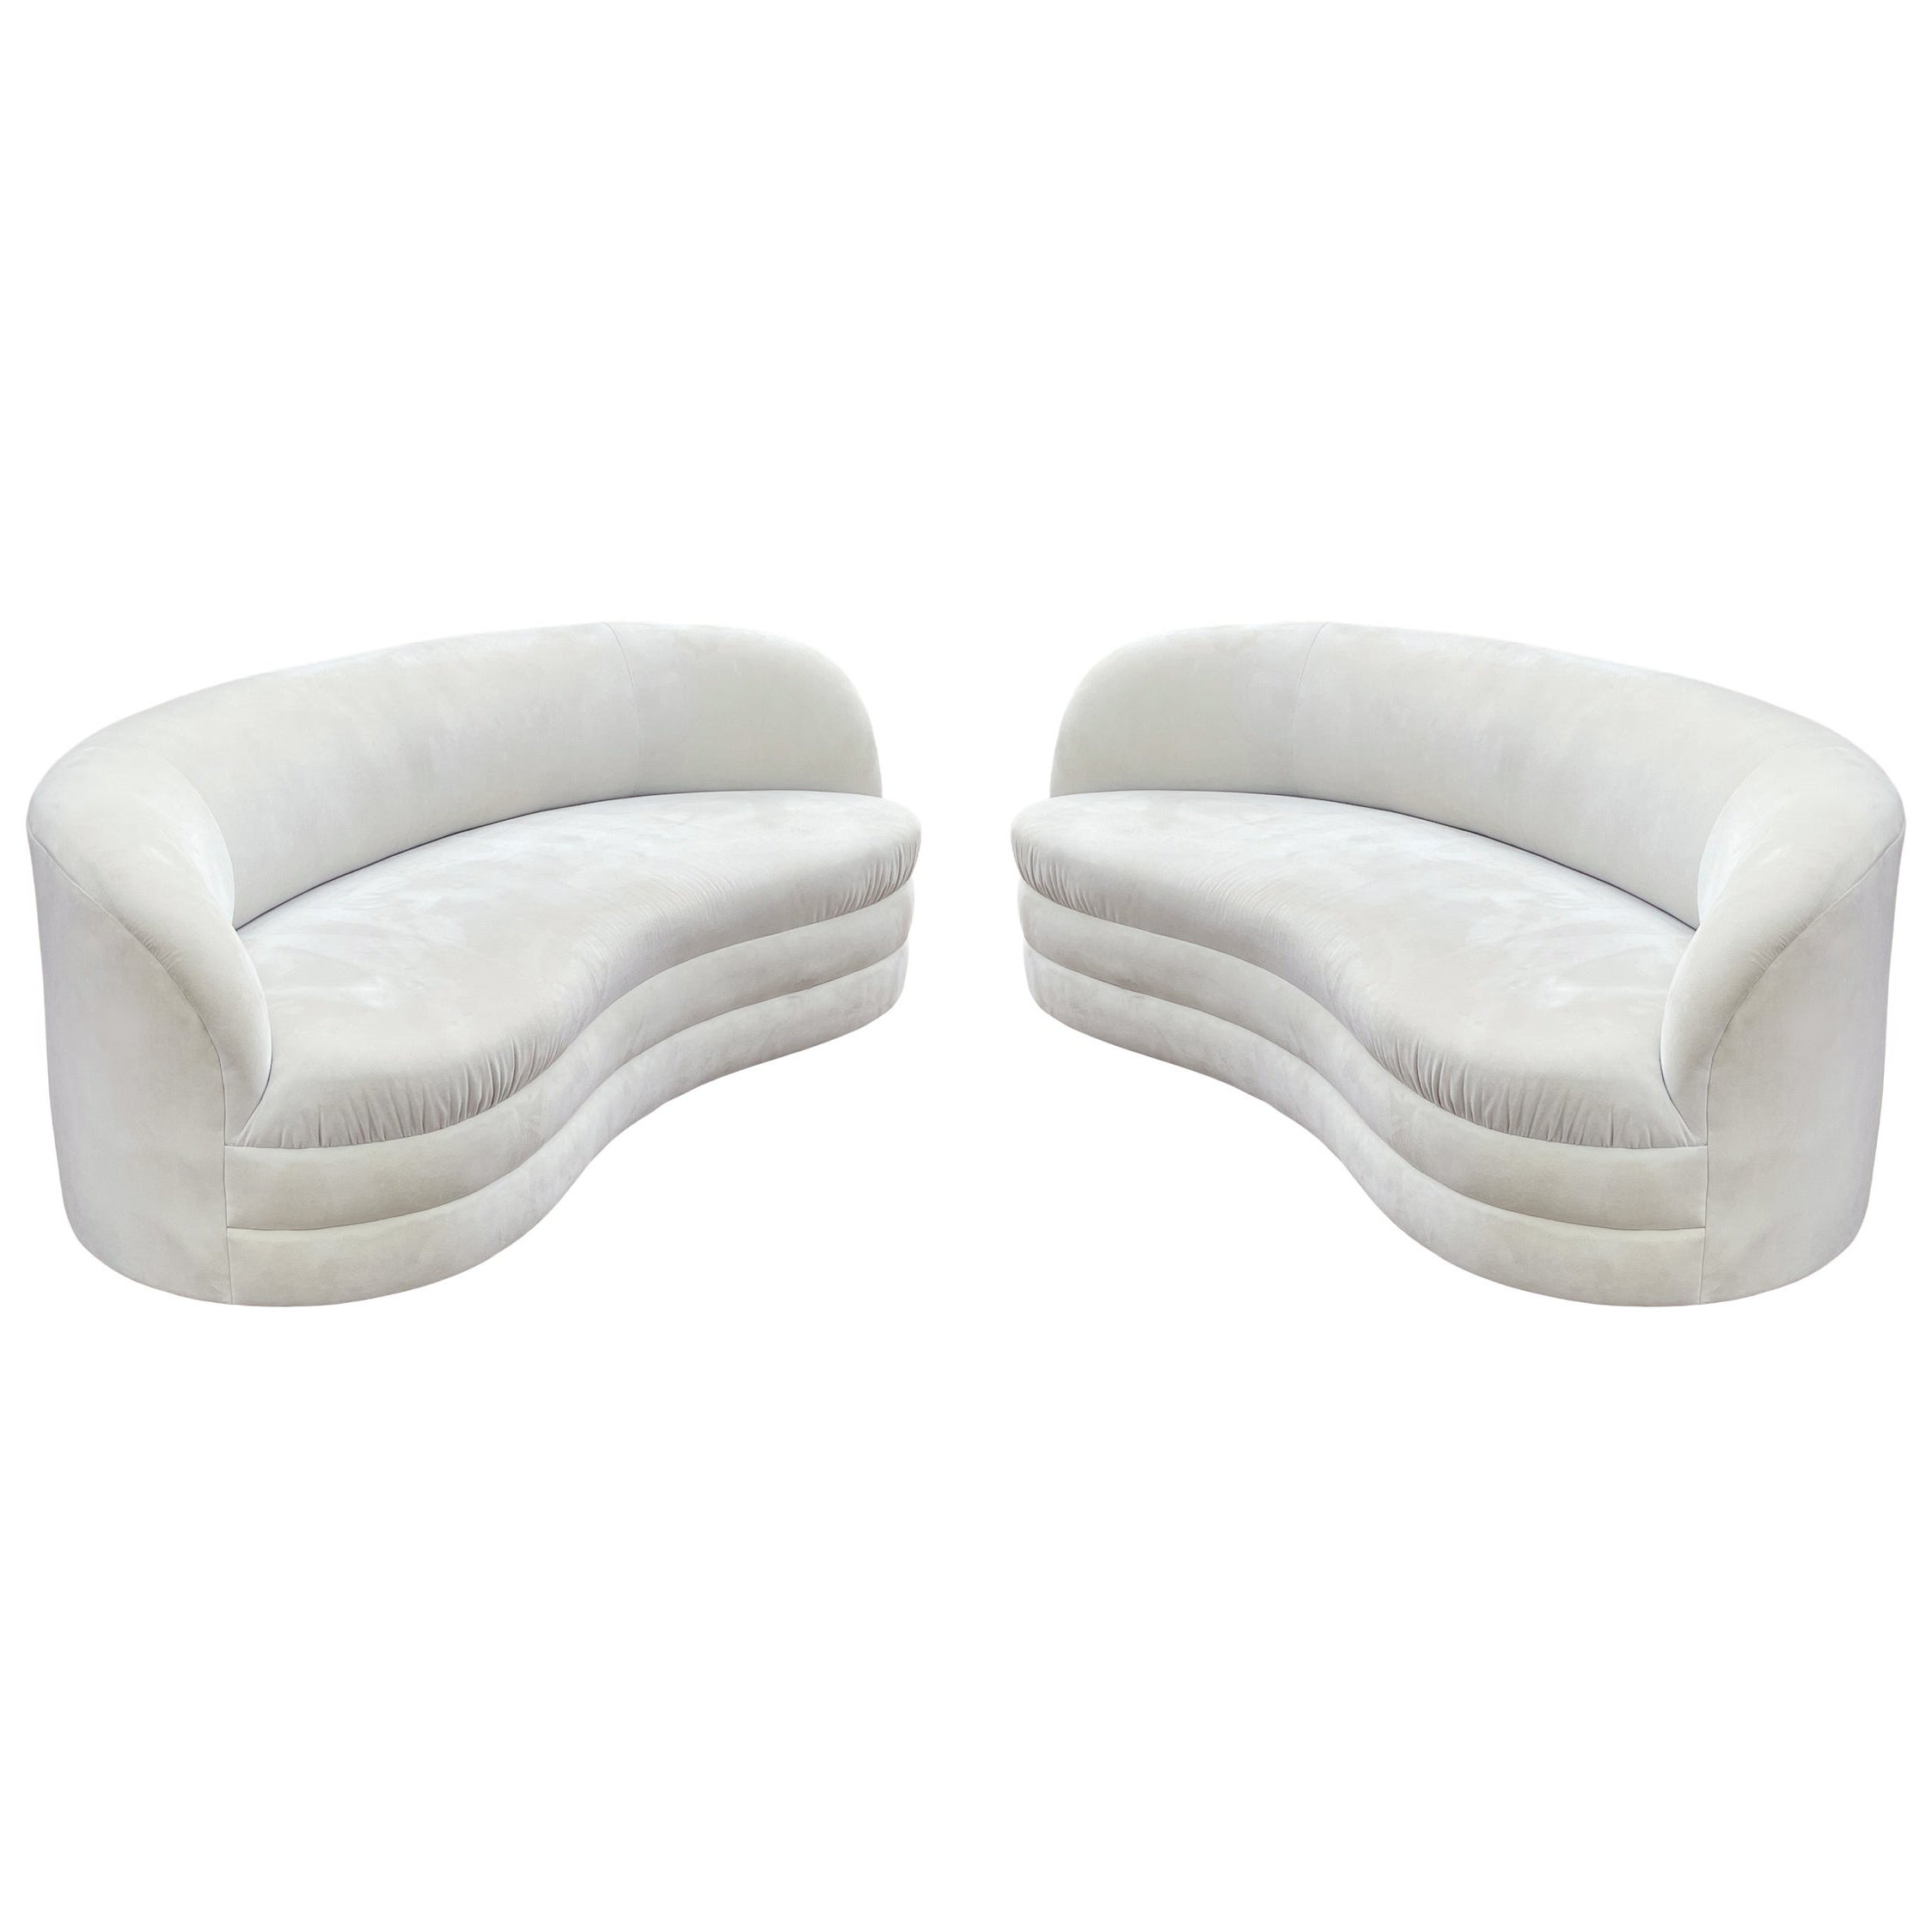 Matching Pair of Mid-Century Modern Curved Kidney Sofas or Loveseats